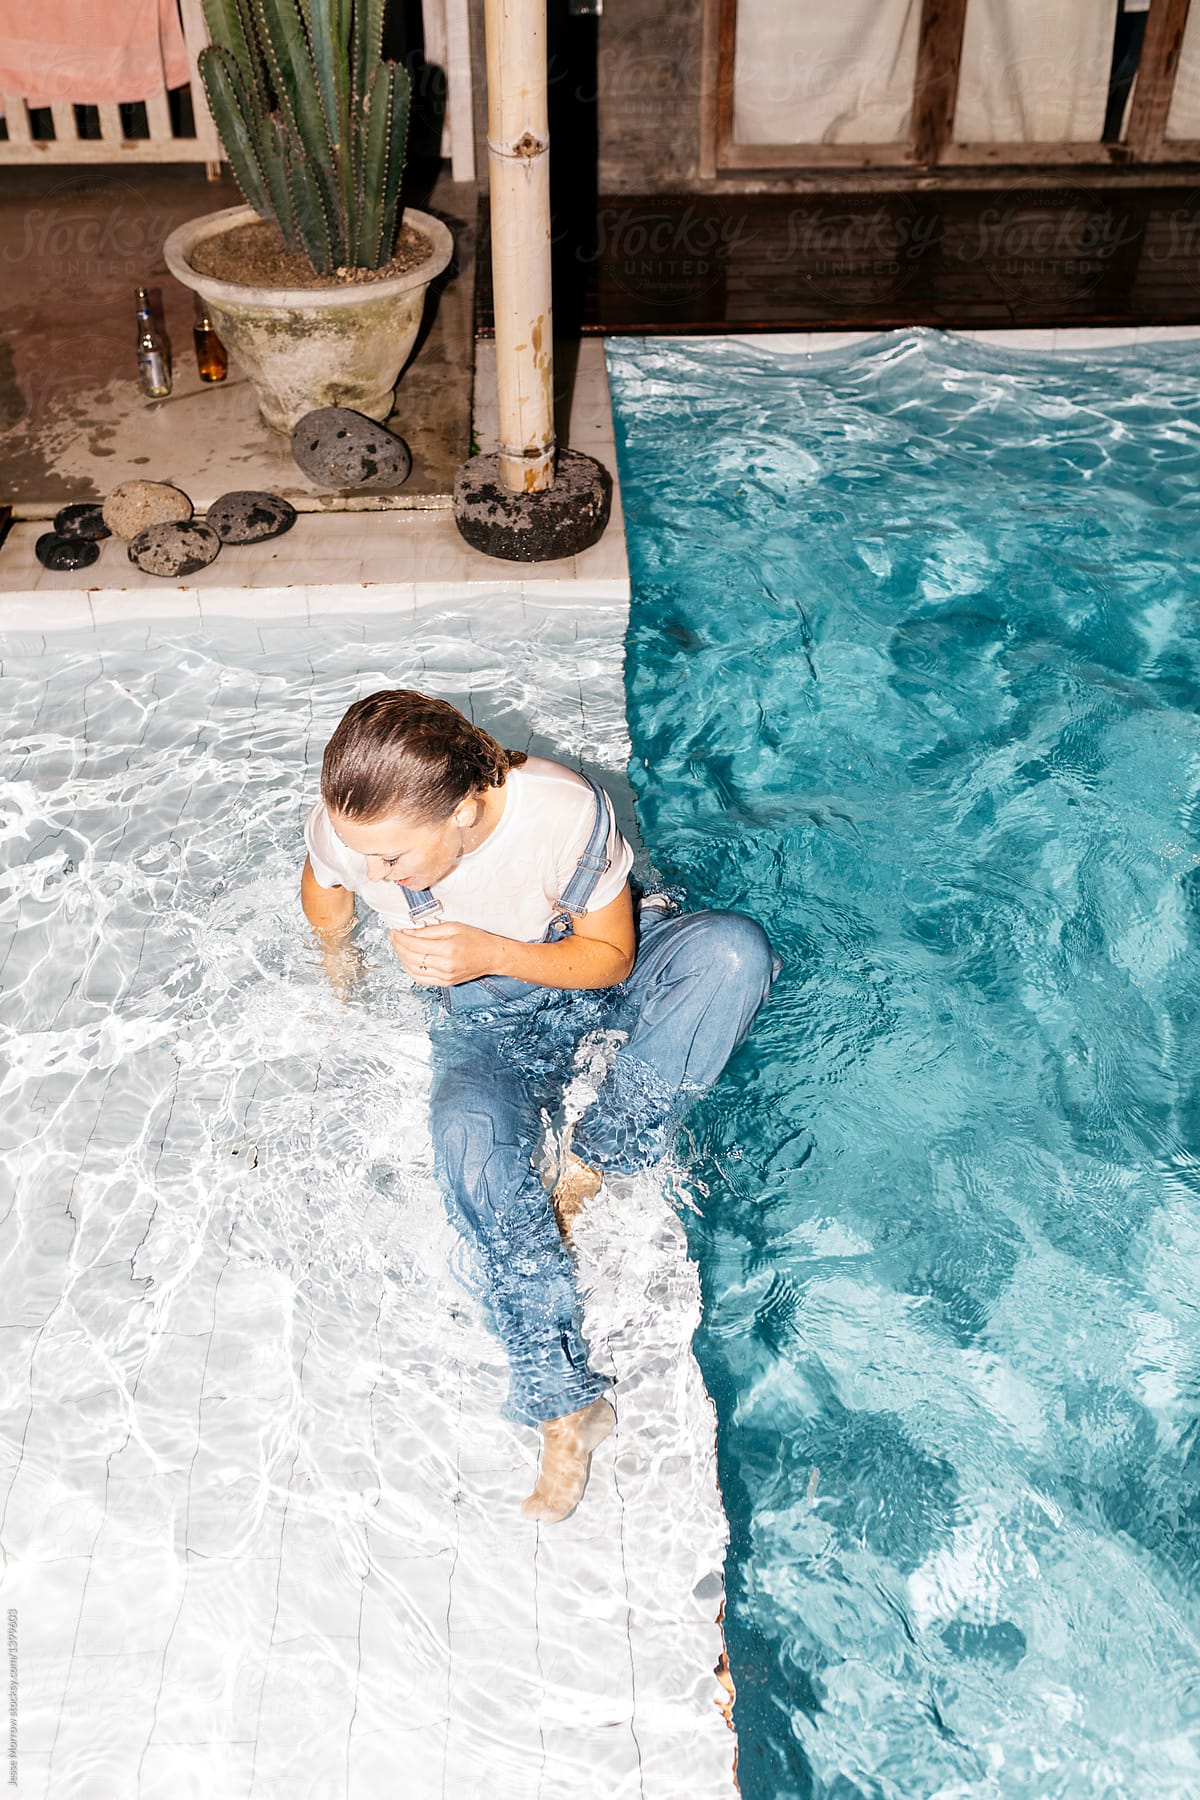 Young Woman Wearing All Her Clothes While Swimming In Pool During